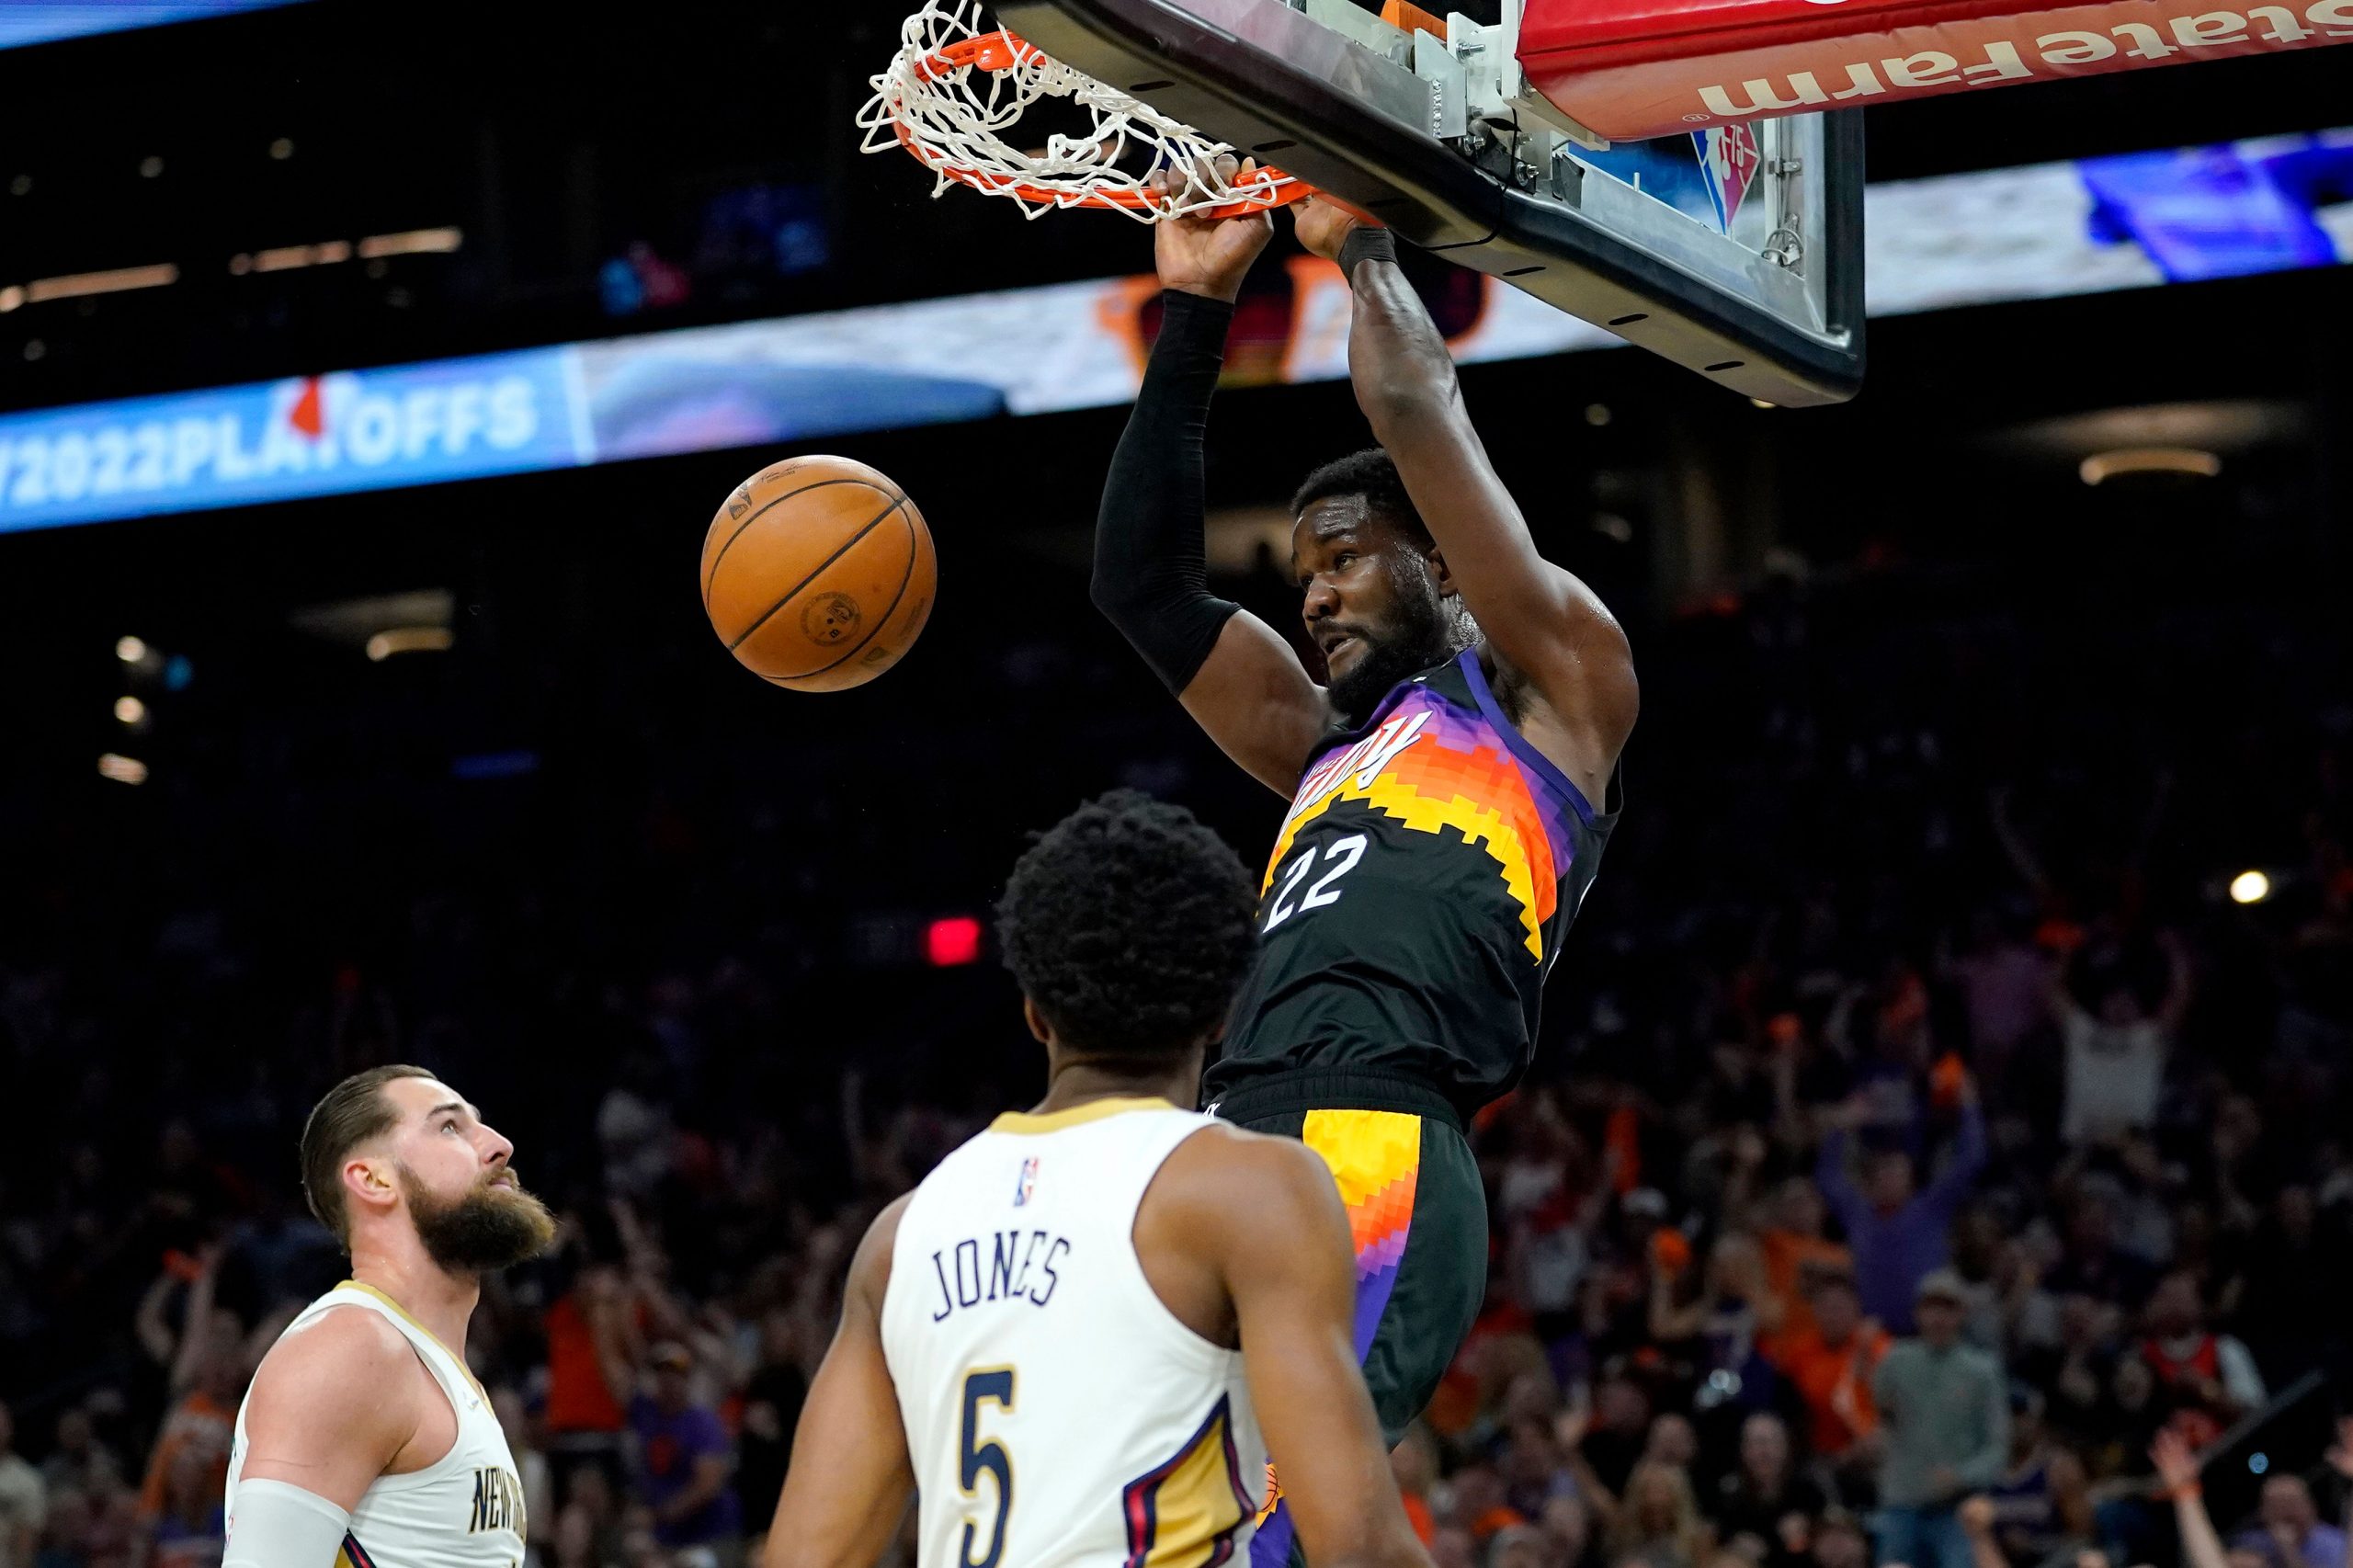 NBA: Suns inch closer to Playoff series victory, beat Pelicans 112-97